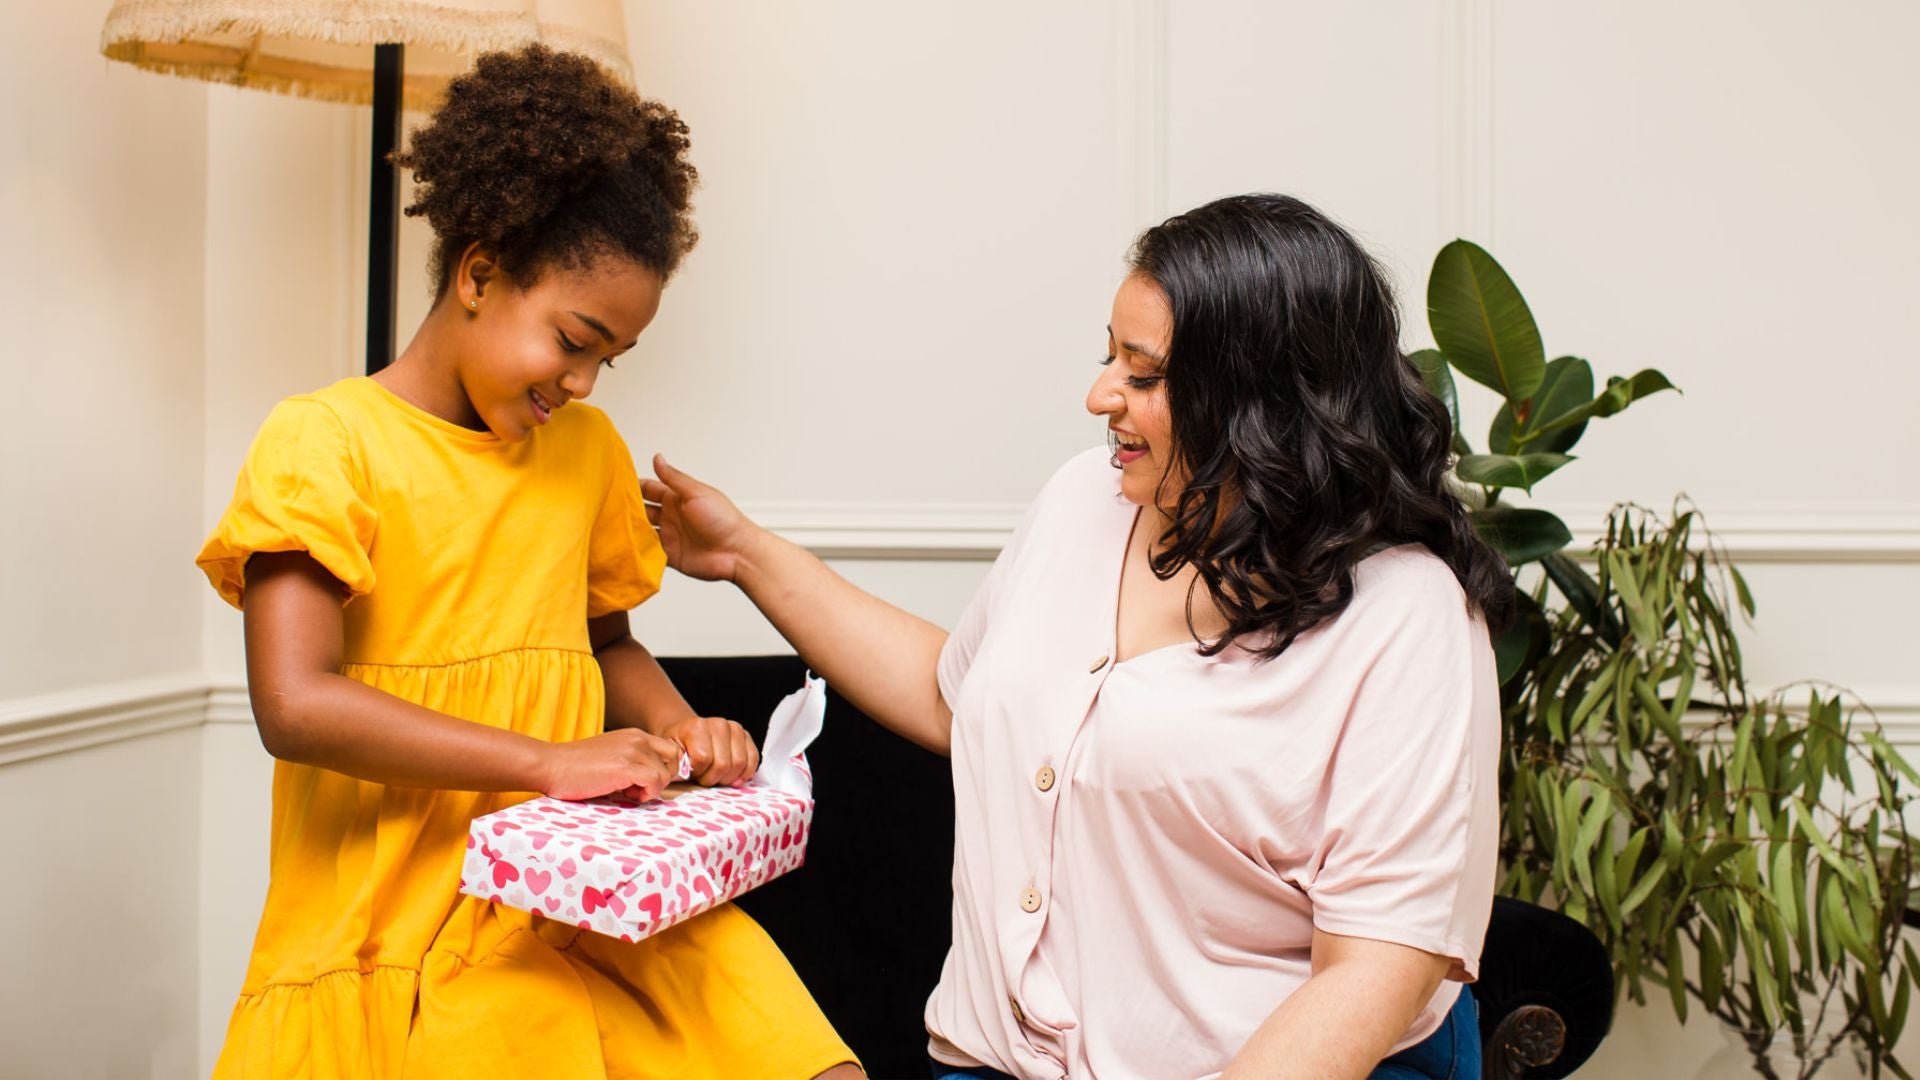 A woman giving a wrapped gift to a child